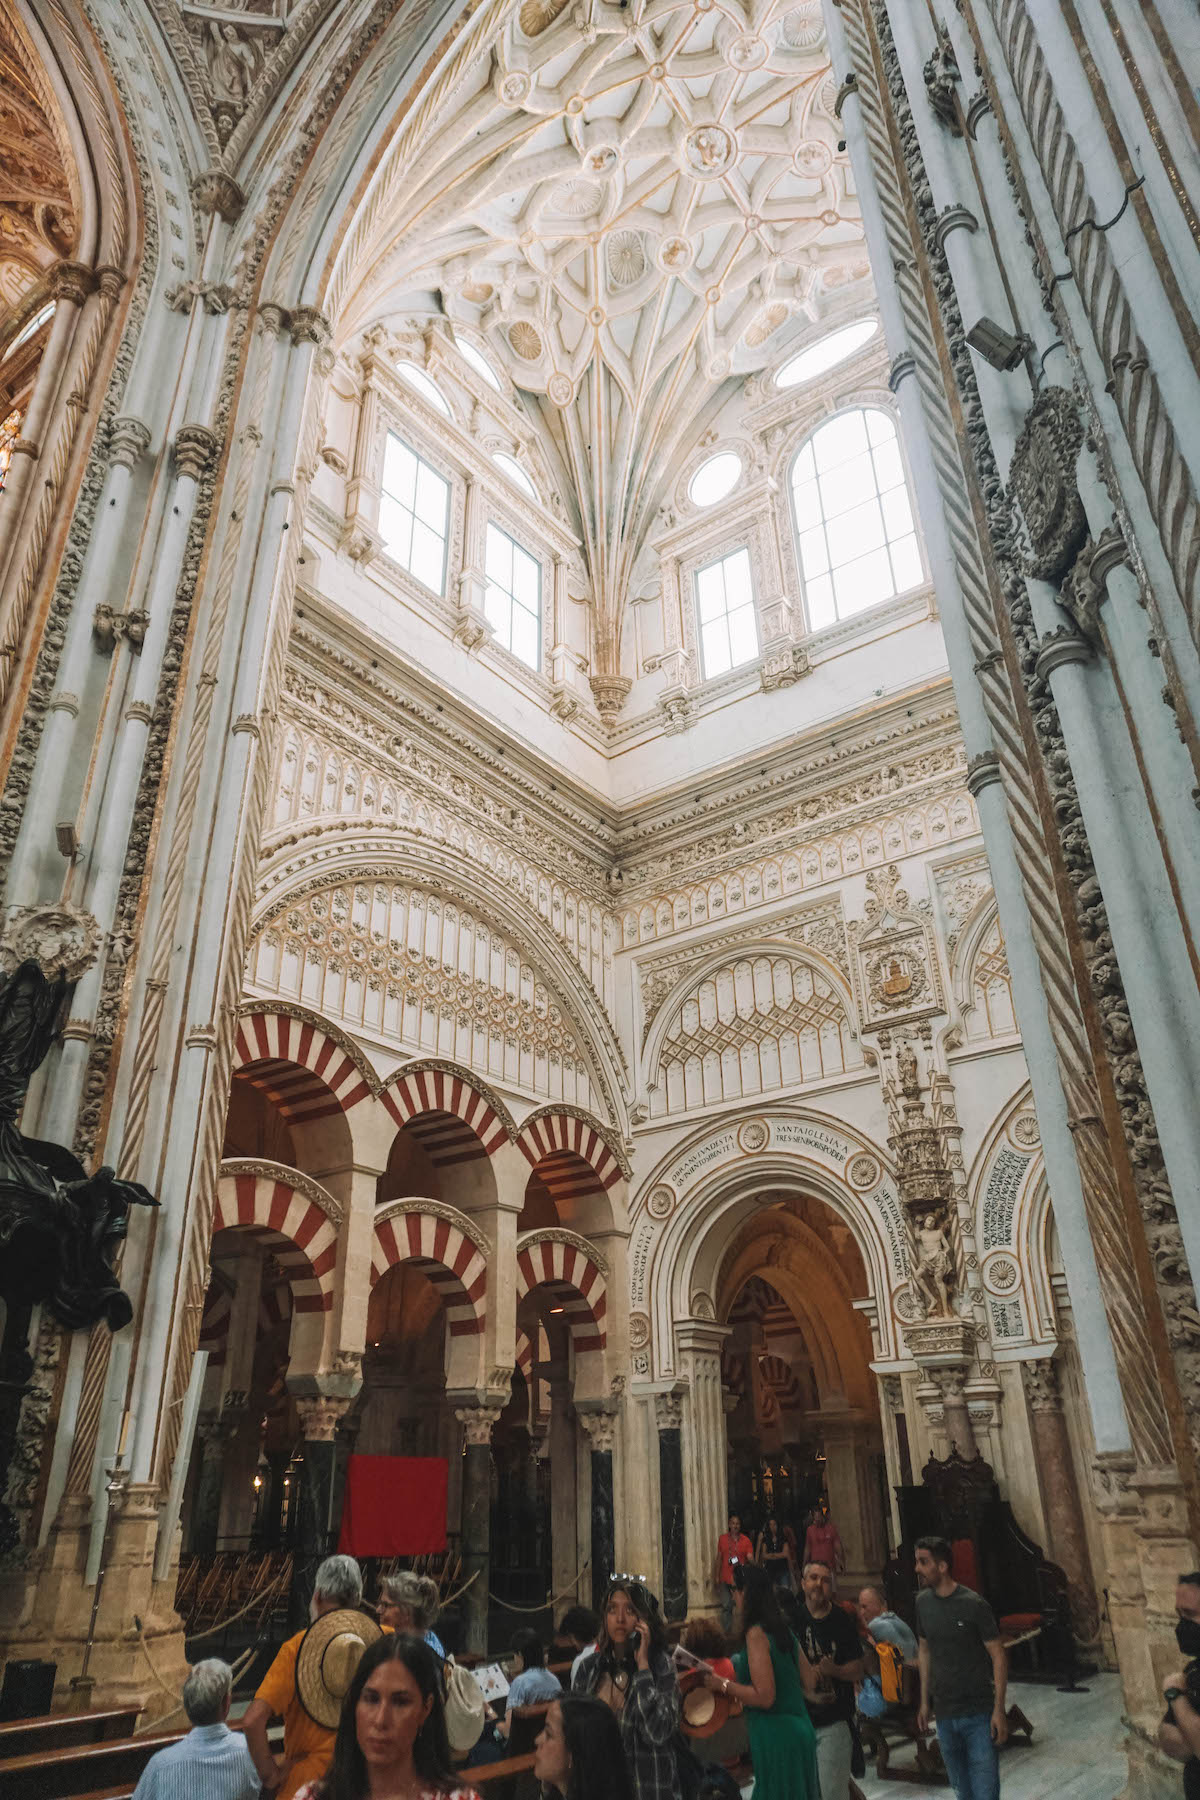 The high choir of the Cordoba Mosque-Cathedral